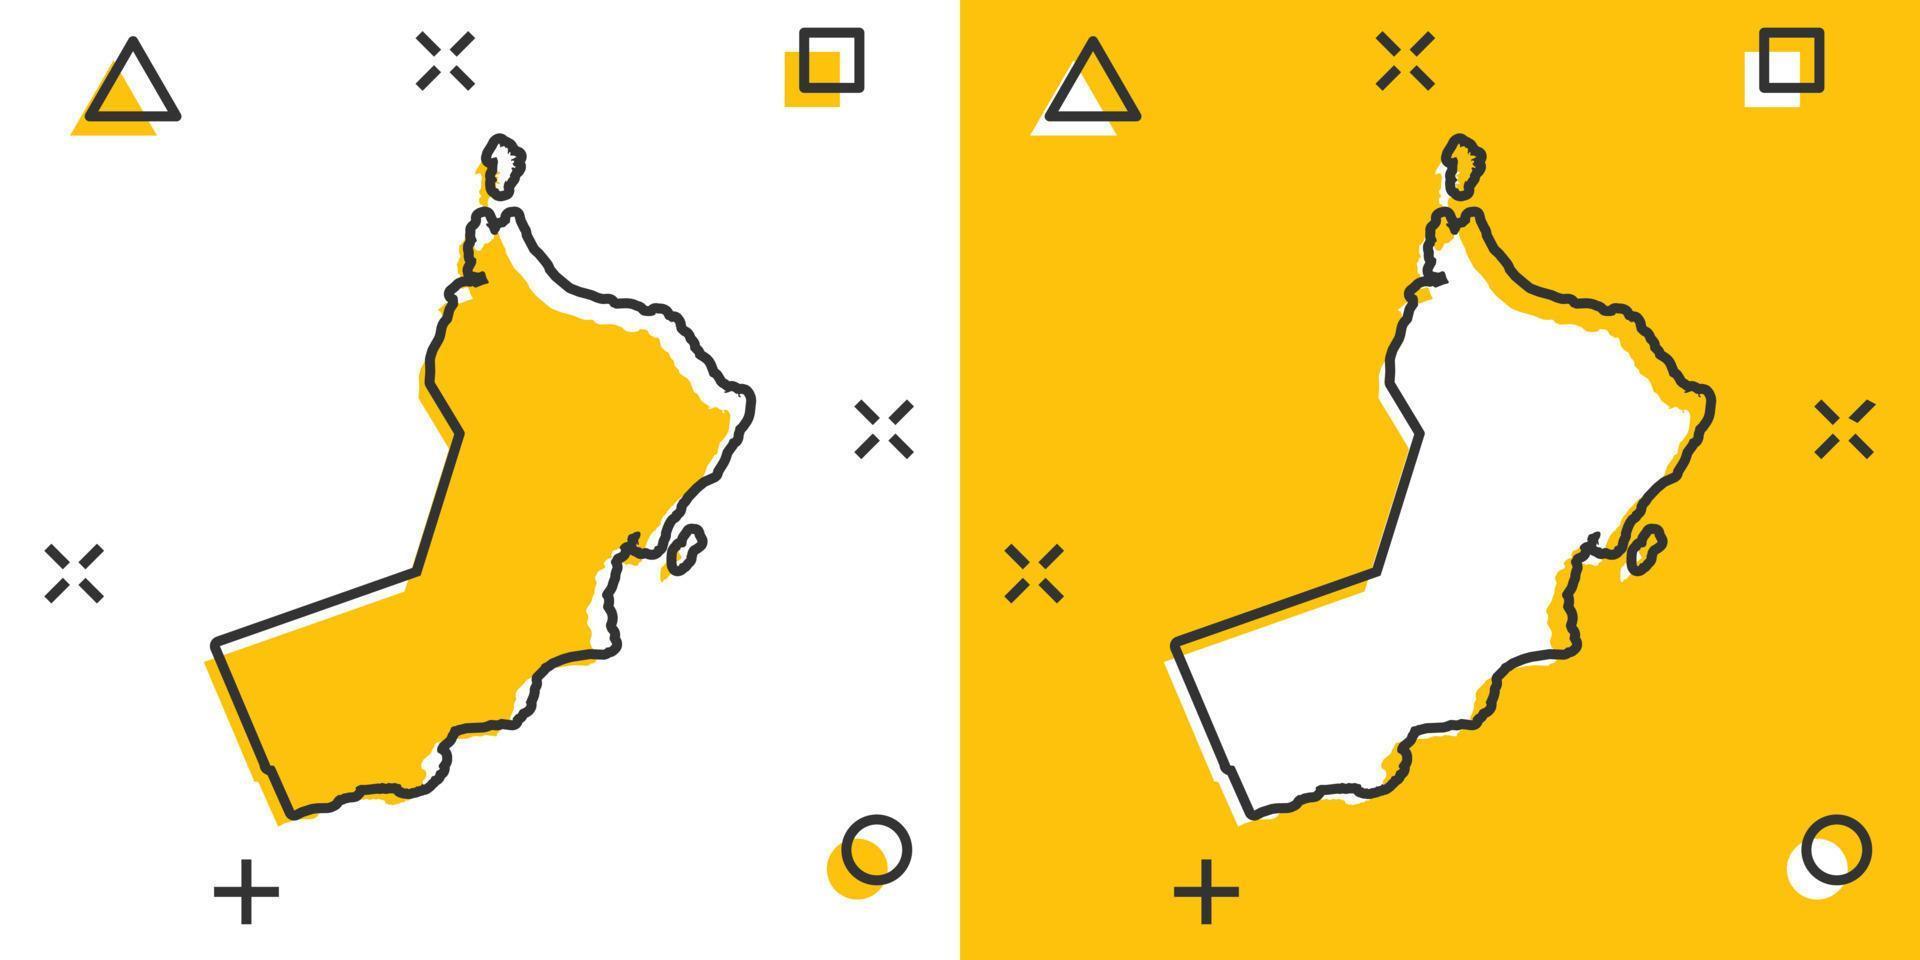 Vector cartoon Oman map icon in comic style. Oman sign illustration pictogram. Cartography map business splash effect concept.